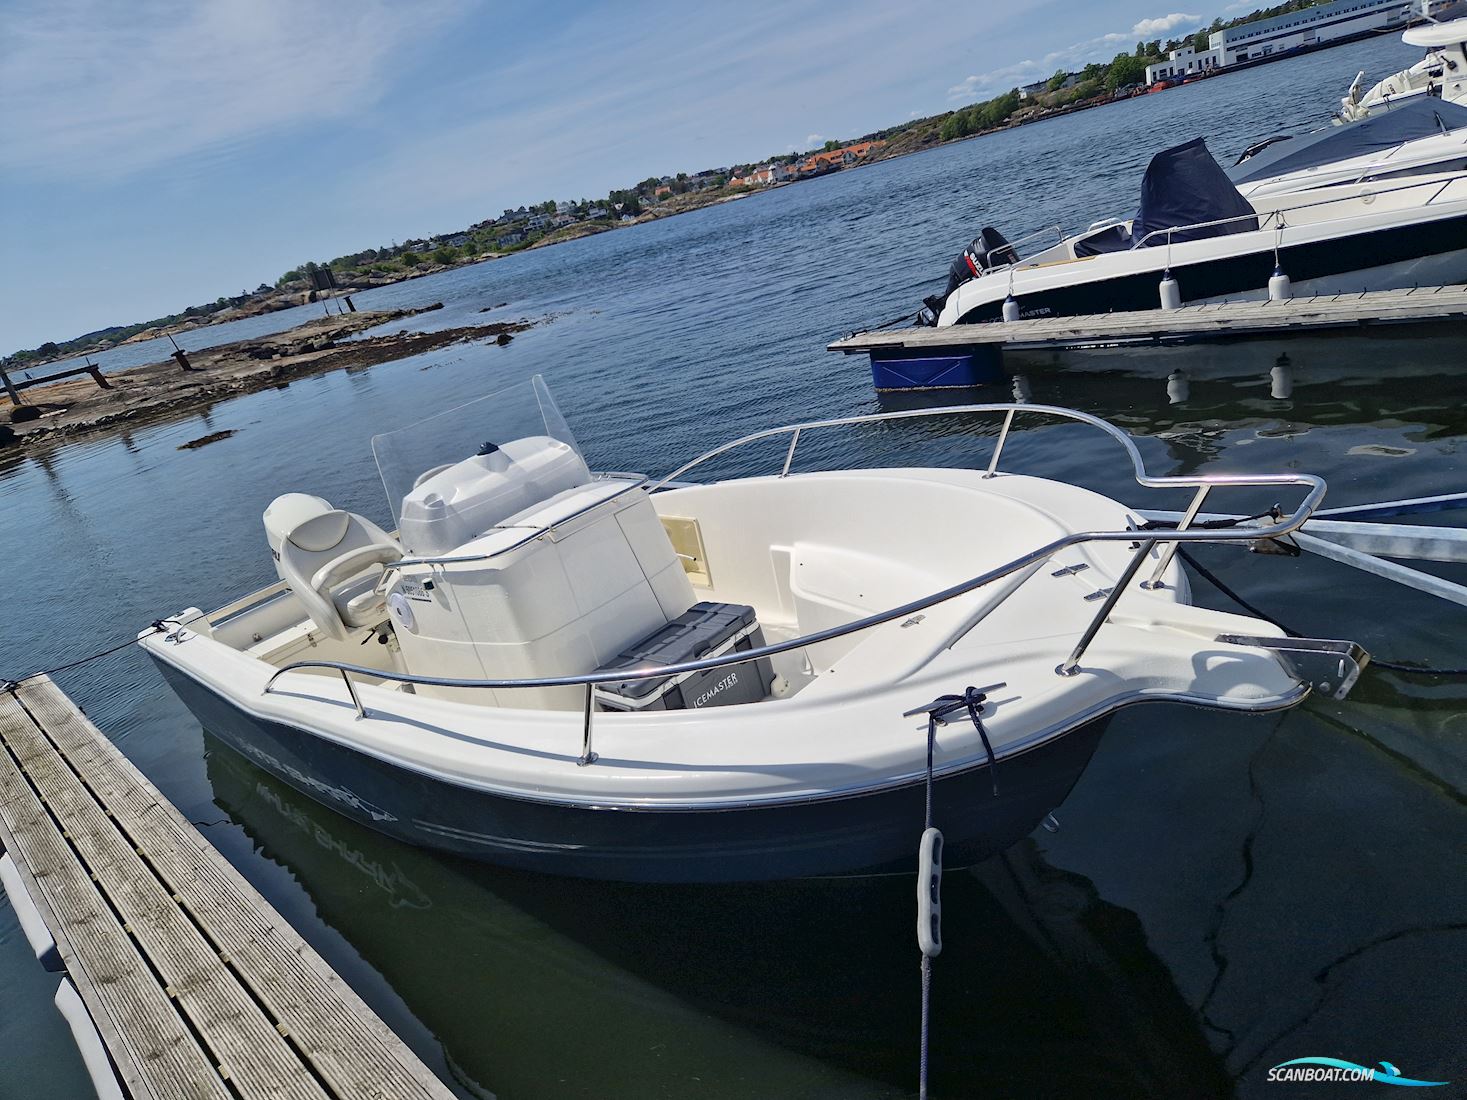 White Shark 205 Motor boat 2007, with Evinrude E-Tec engine, Norway